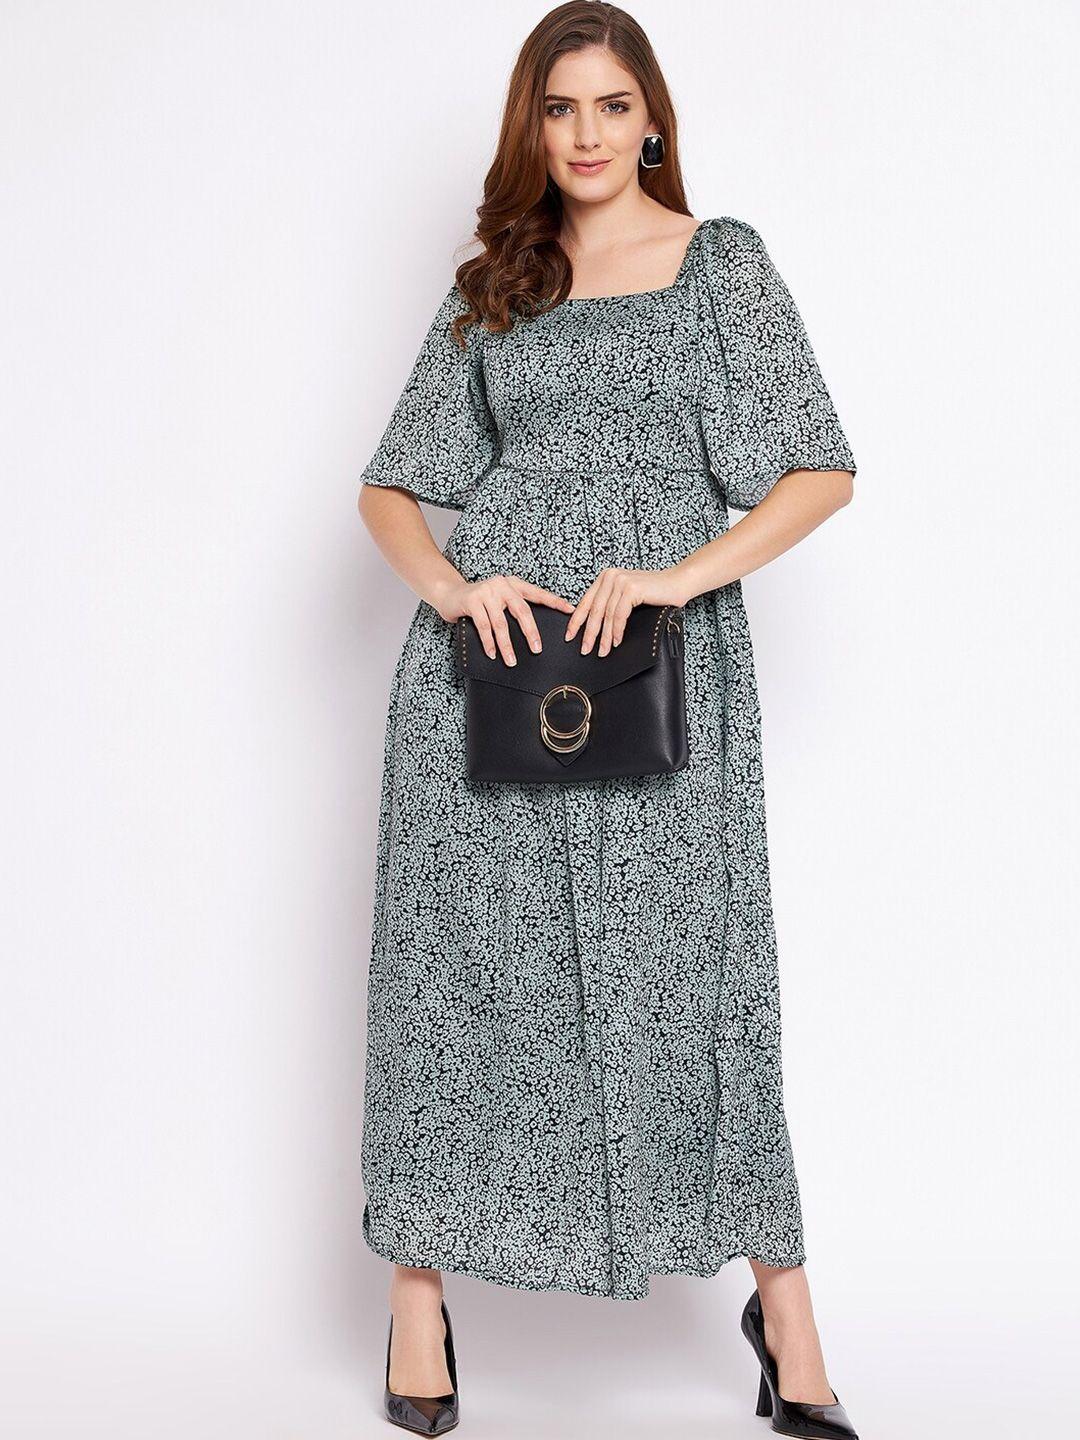 baesd floral printed square neck puffed sleeves cotton fit and flare maxi dress